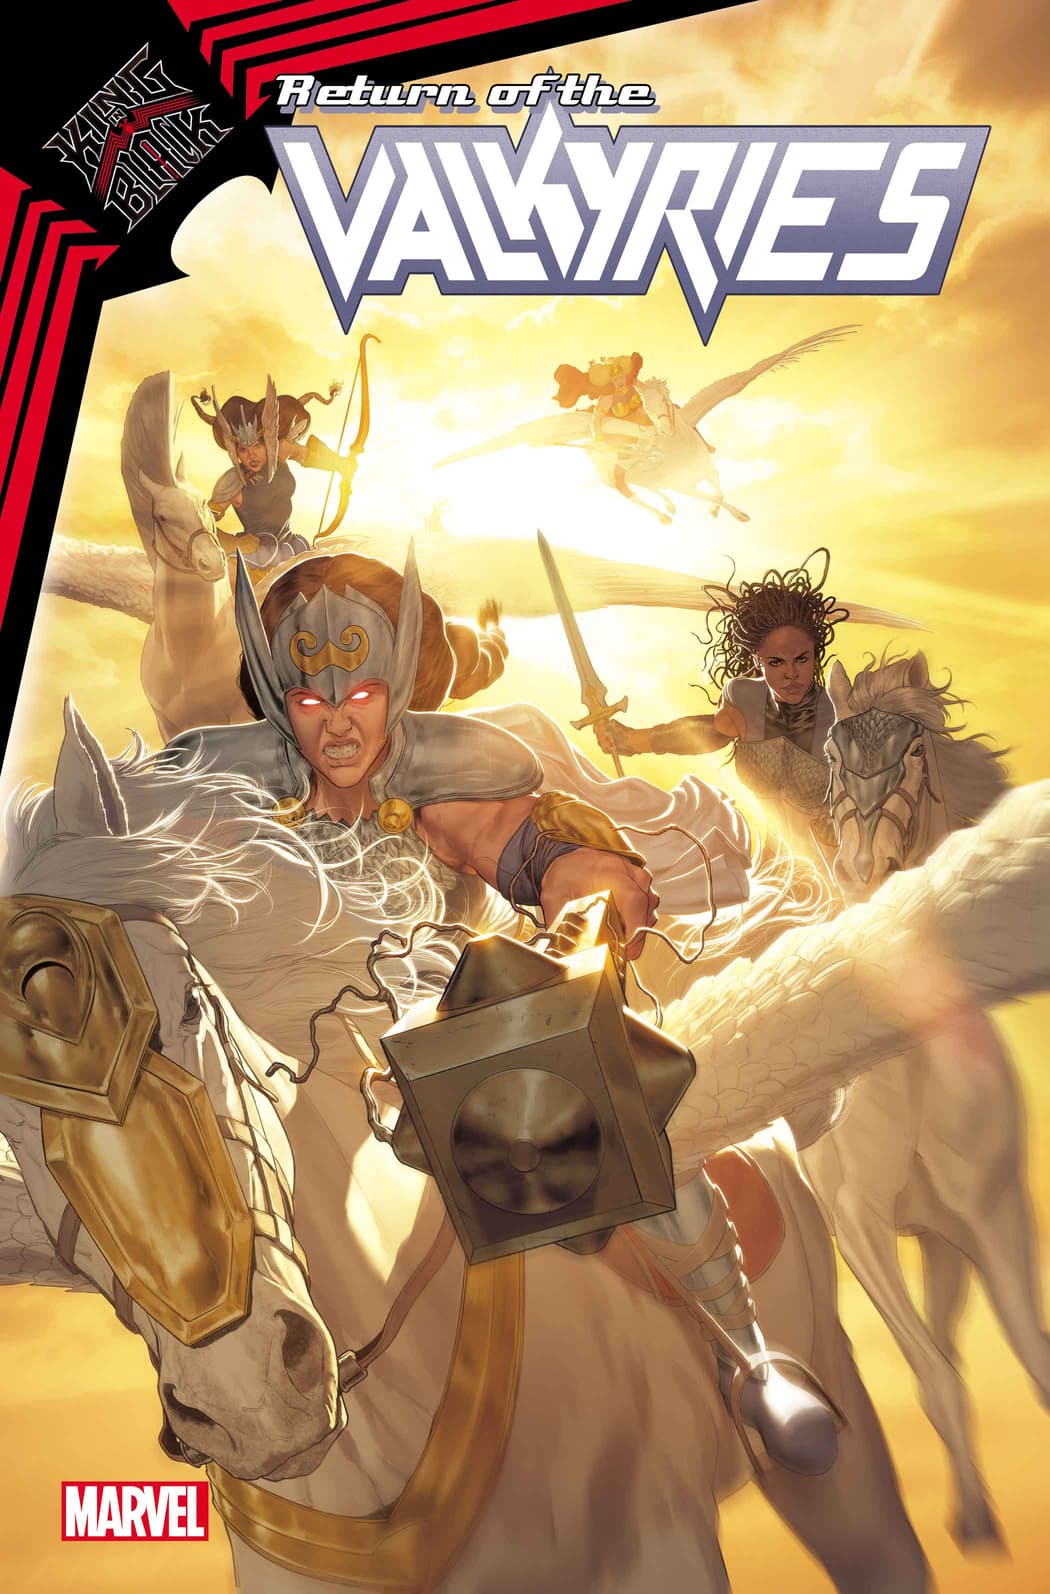 KING IN BLACK: RETURN OF THE VALKYRIES (2021) #1